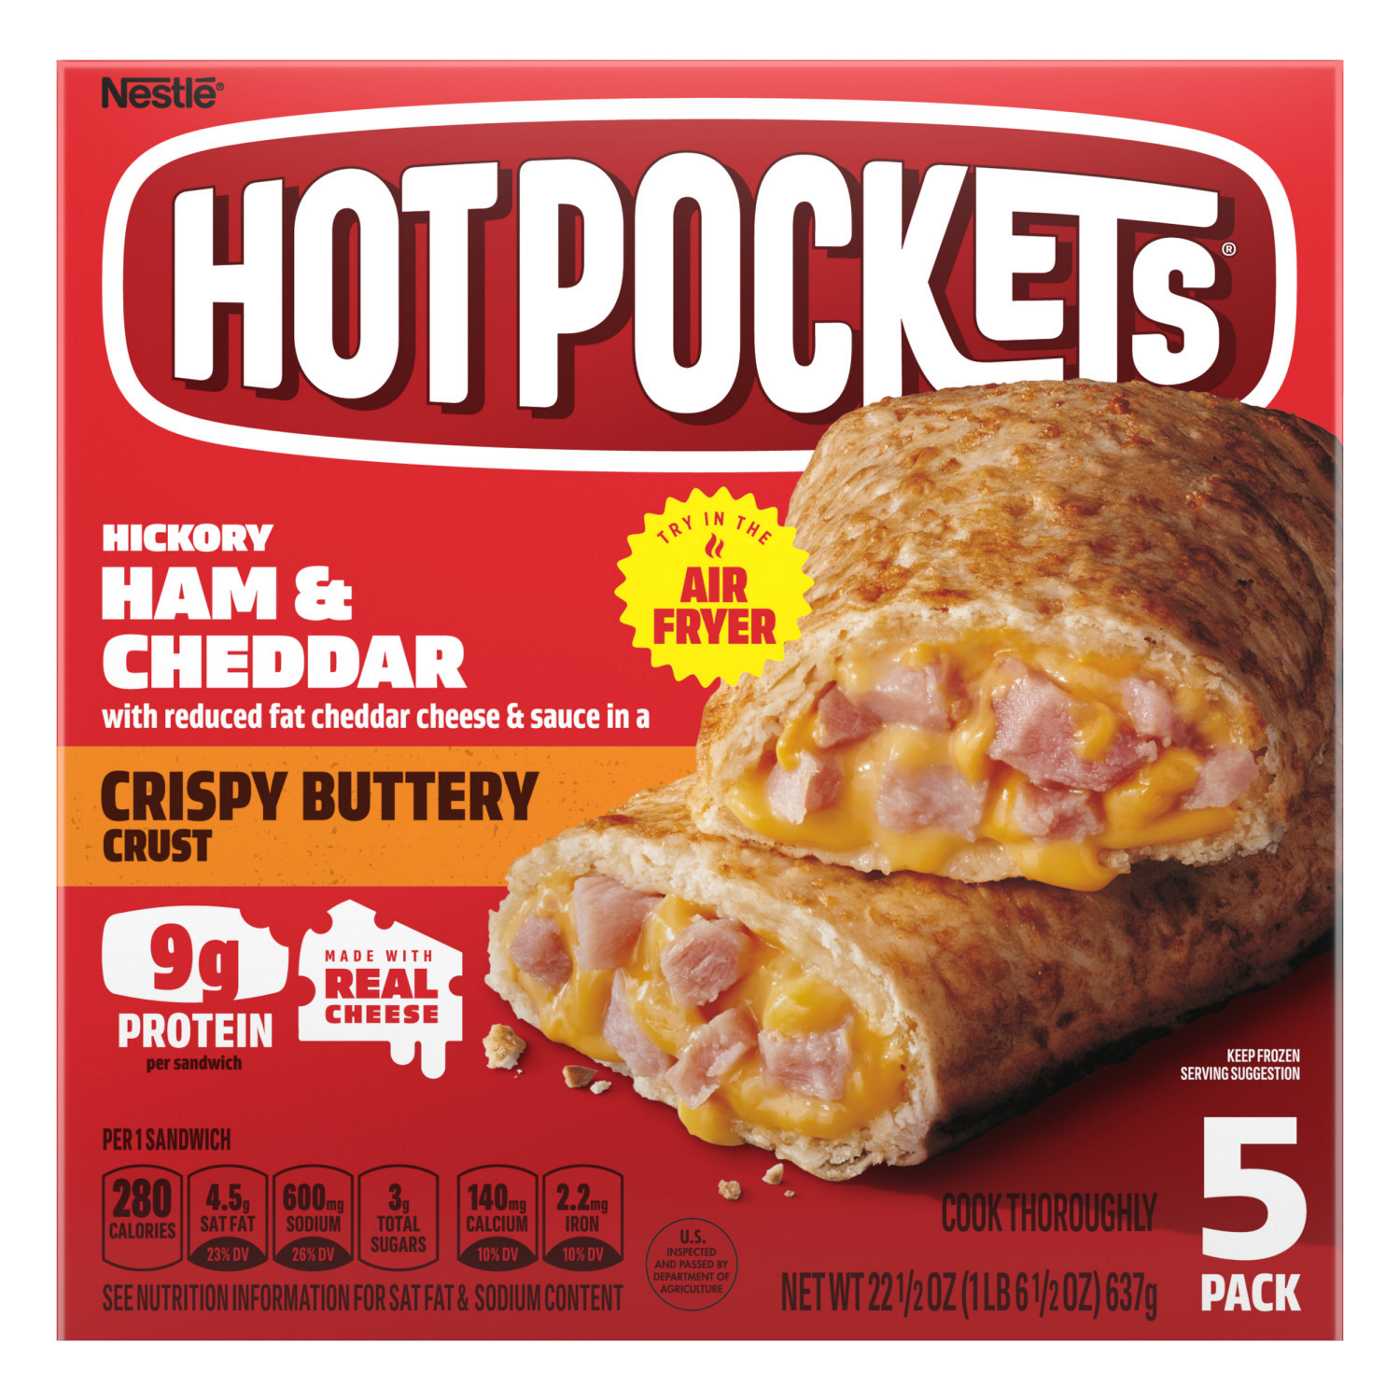 Hot Pockets Hickory Ham & Cheddar Frozen Sandwiches - Crispy Buttery Crust; image 1 of 8